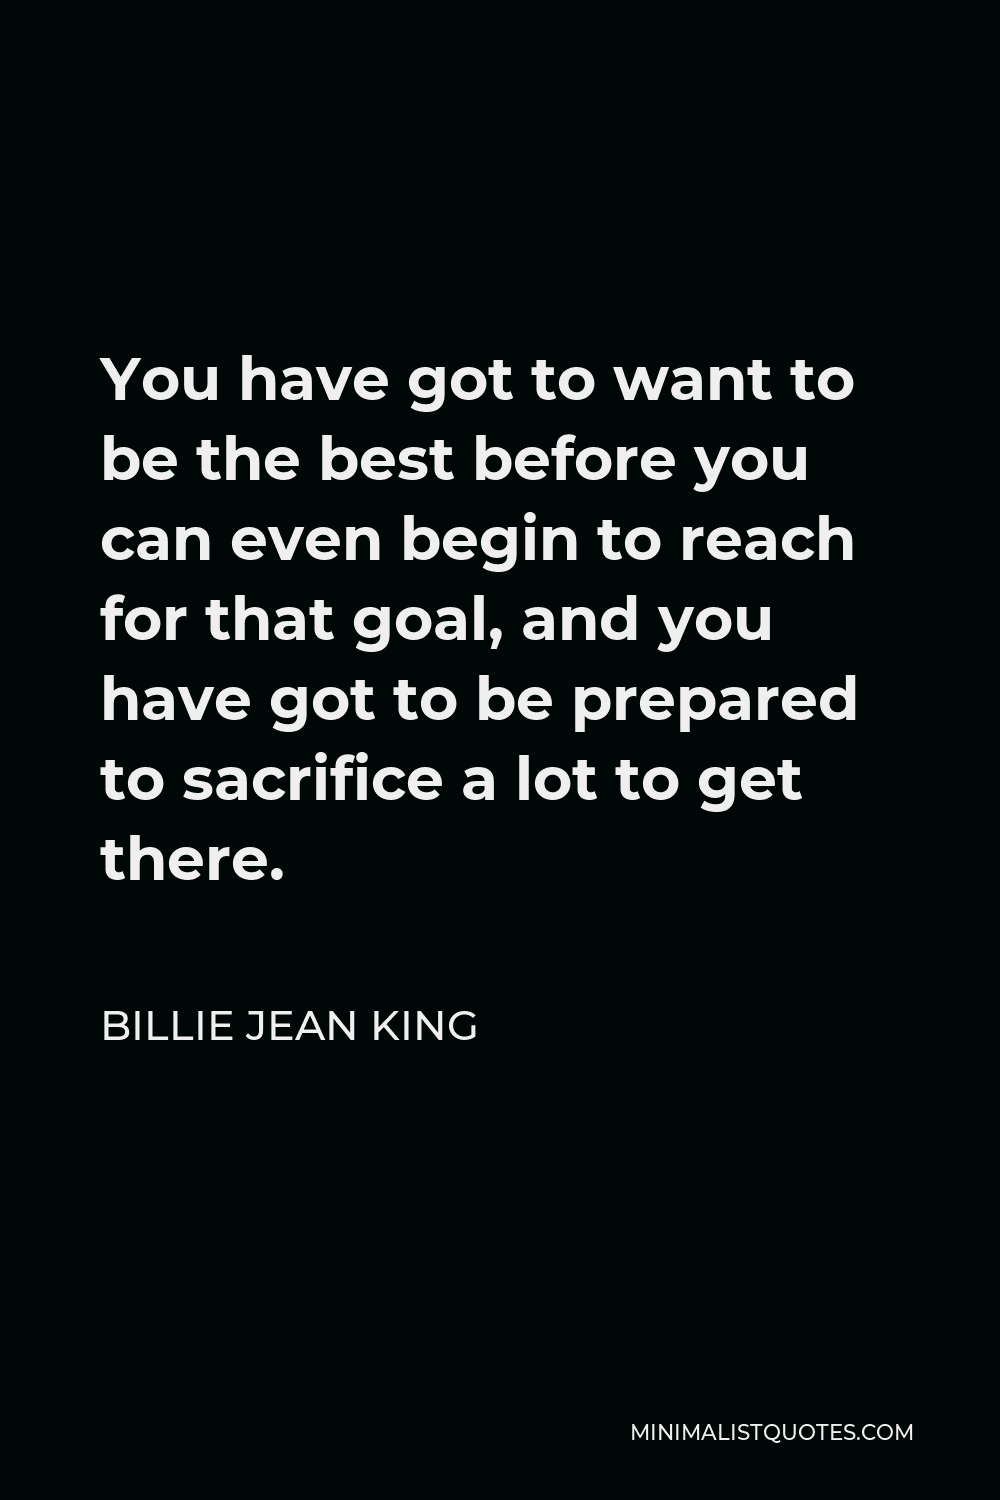 Billie Jean King Quote - You have got to want to be the best before you can even begin to reach for that goal, and you have got to be prepared to sacrifice a lot to get there.